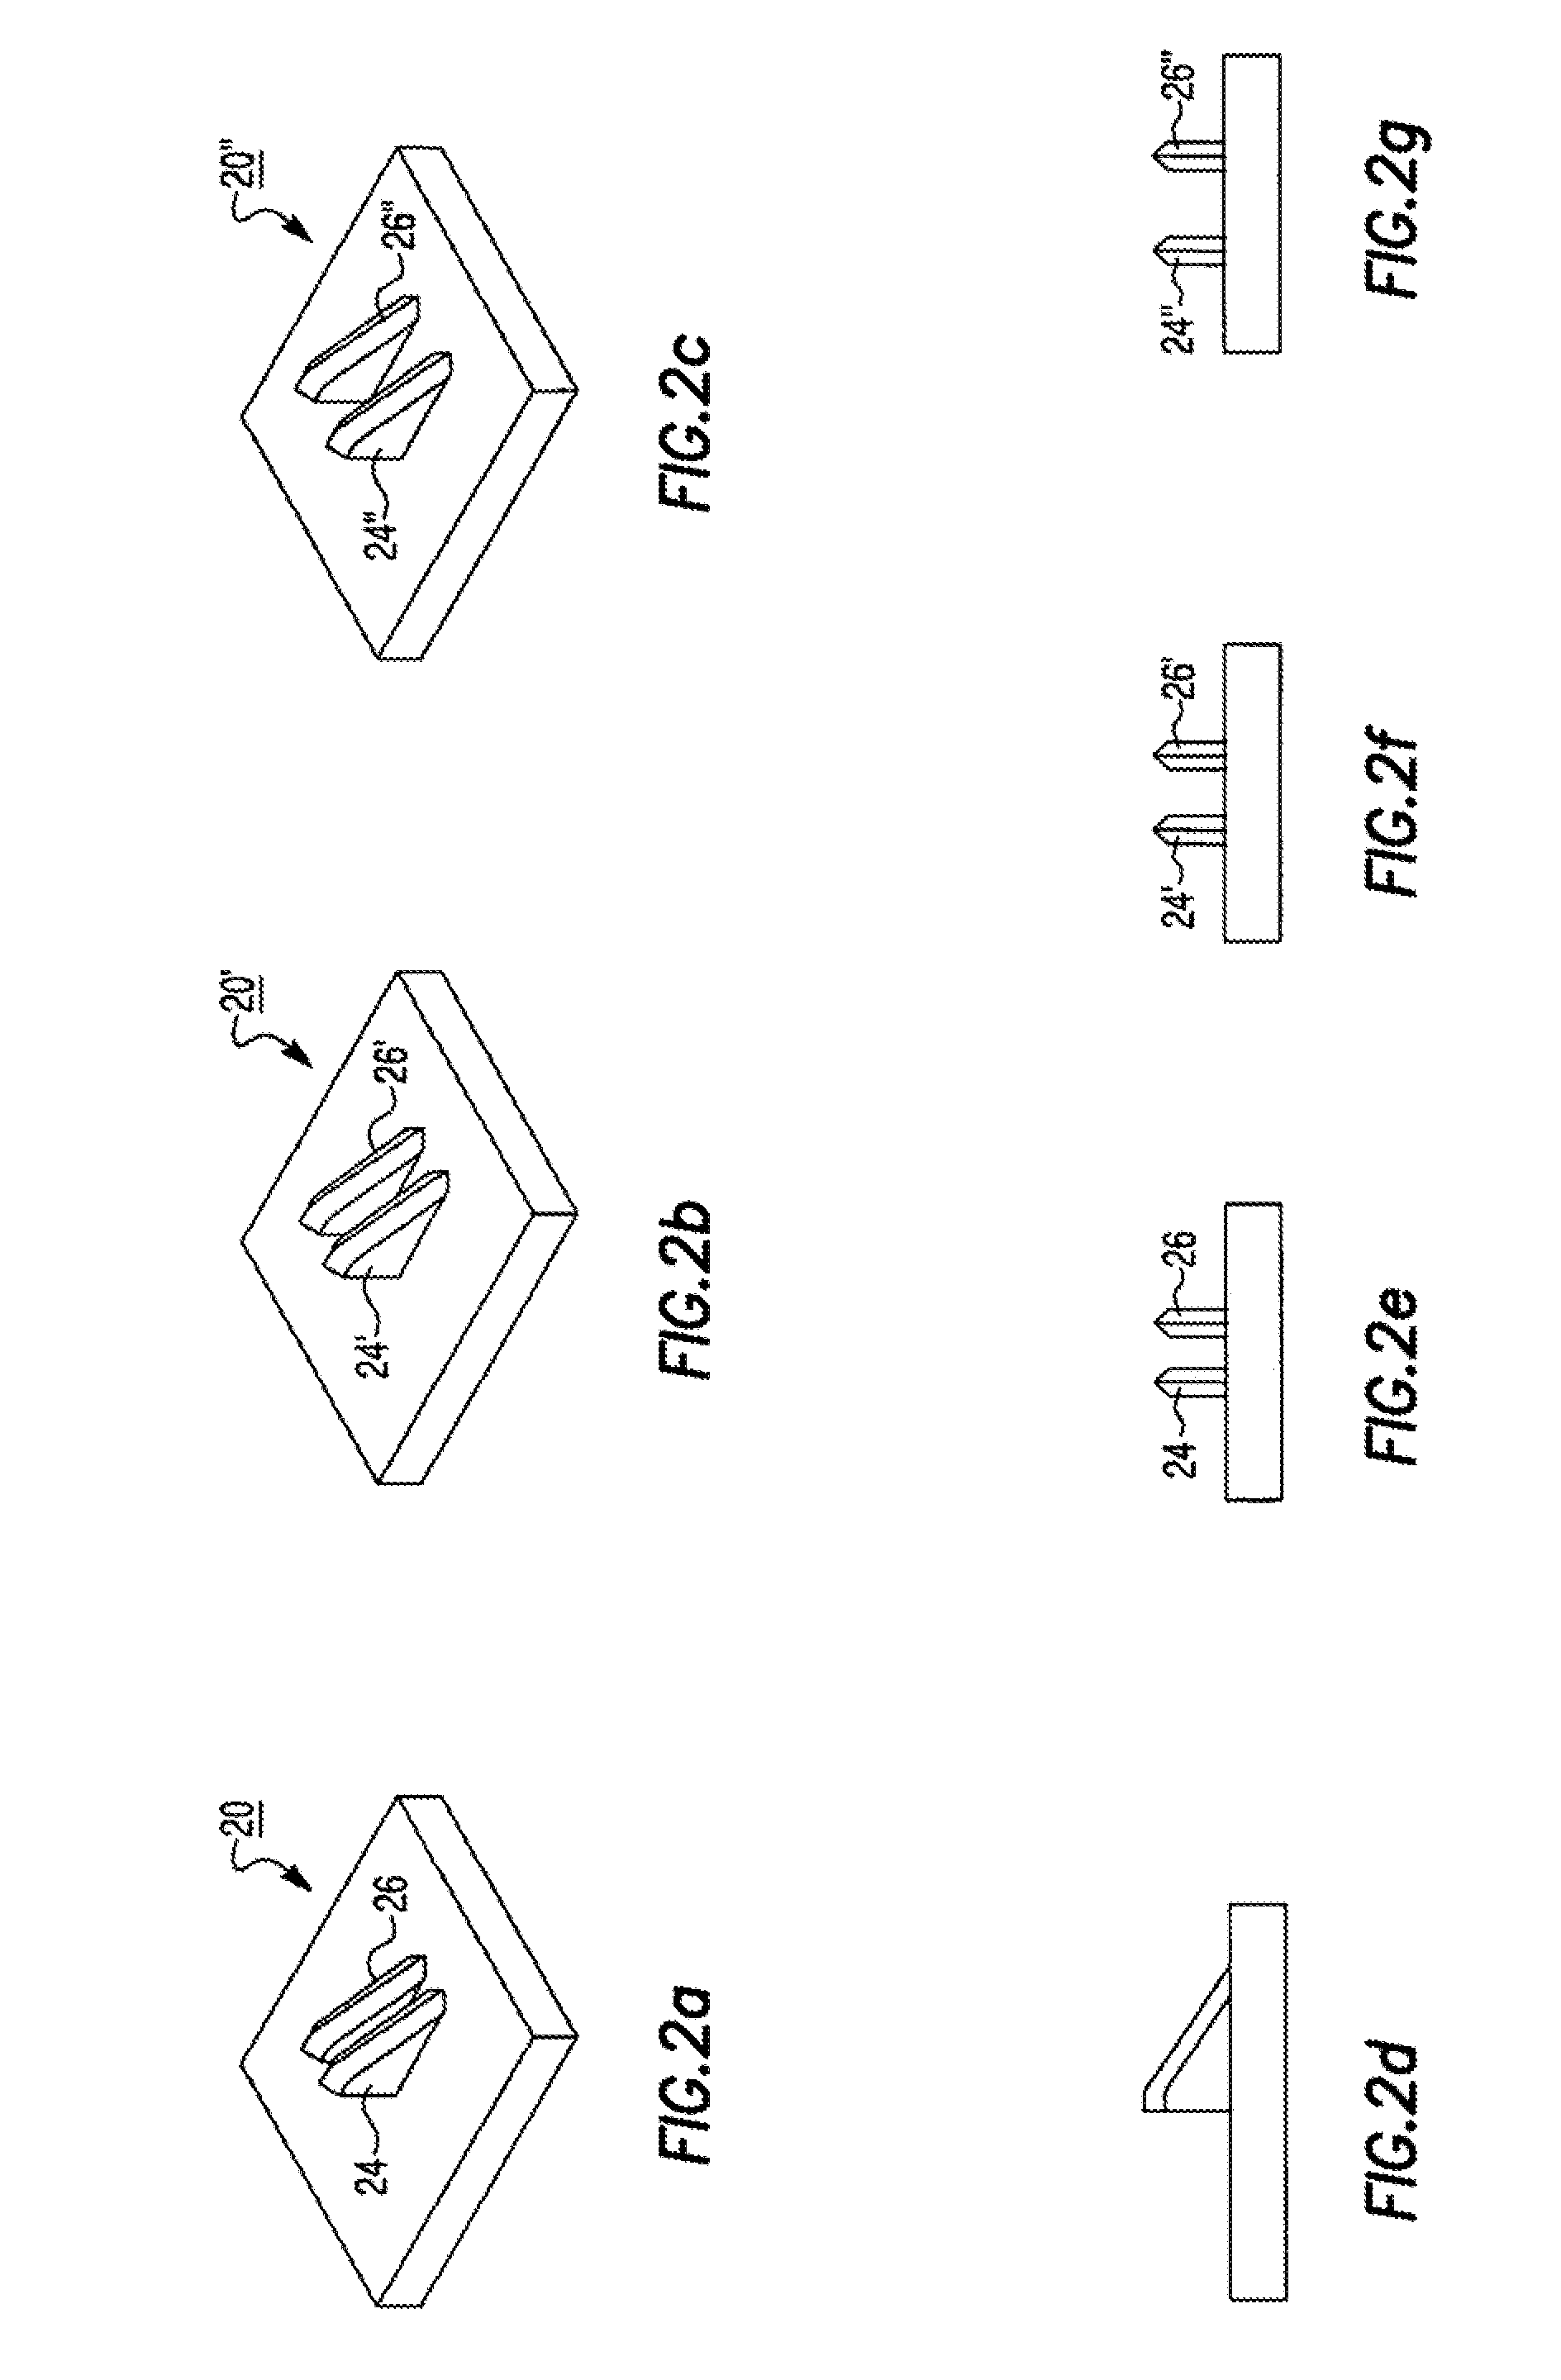 Downhole rock scratcher and method for identifying strength of subsurface intervals